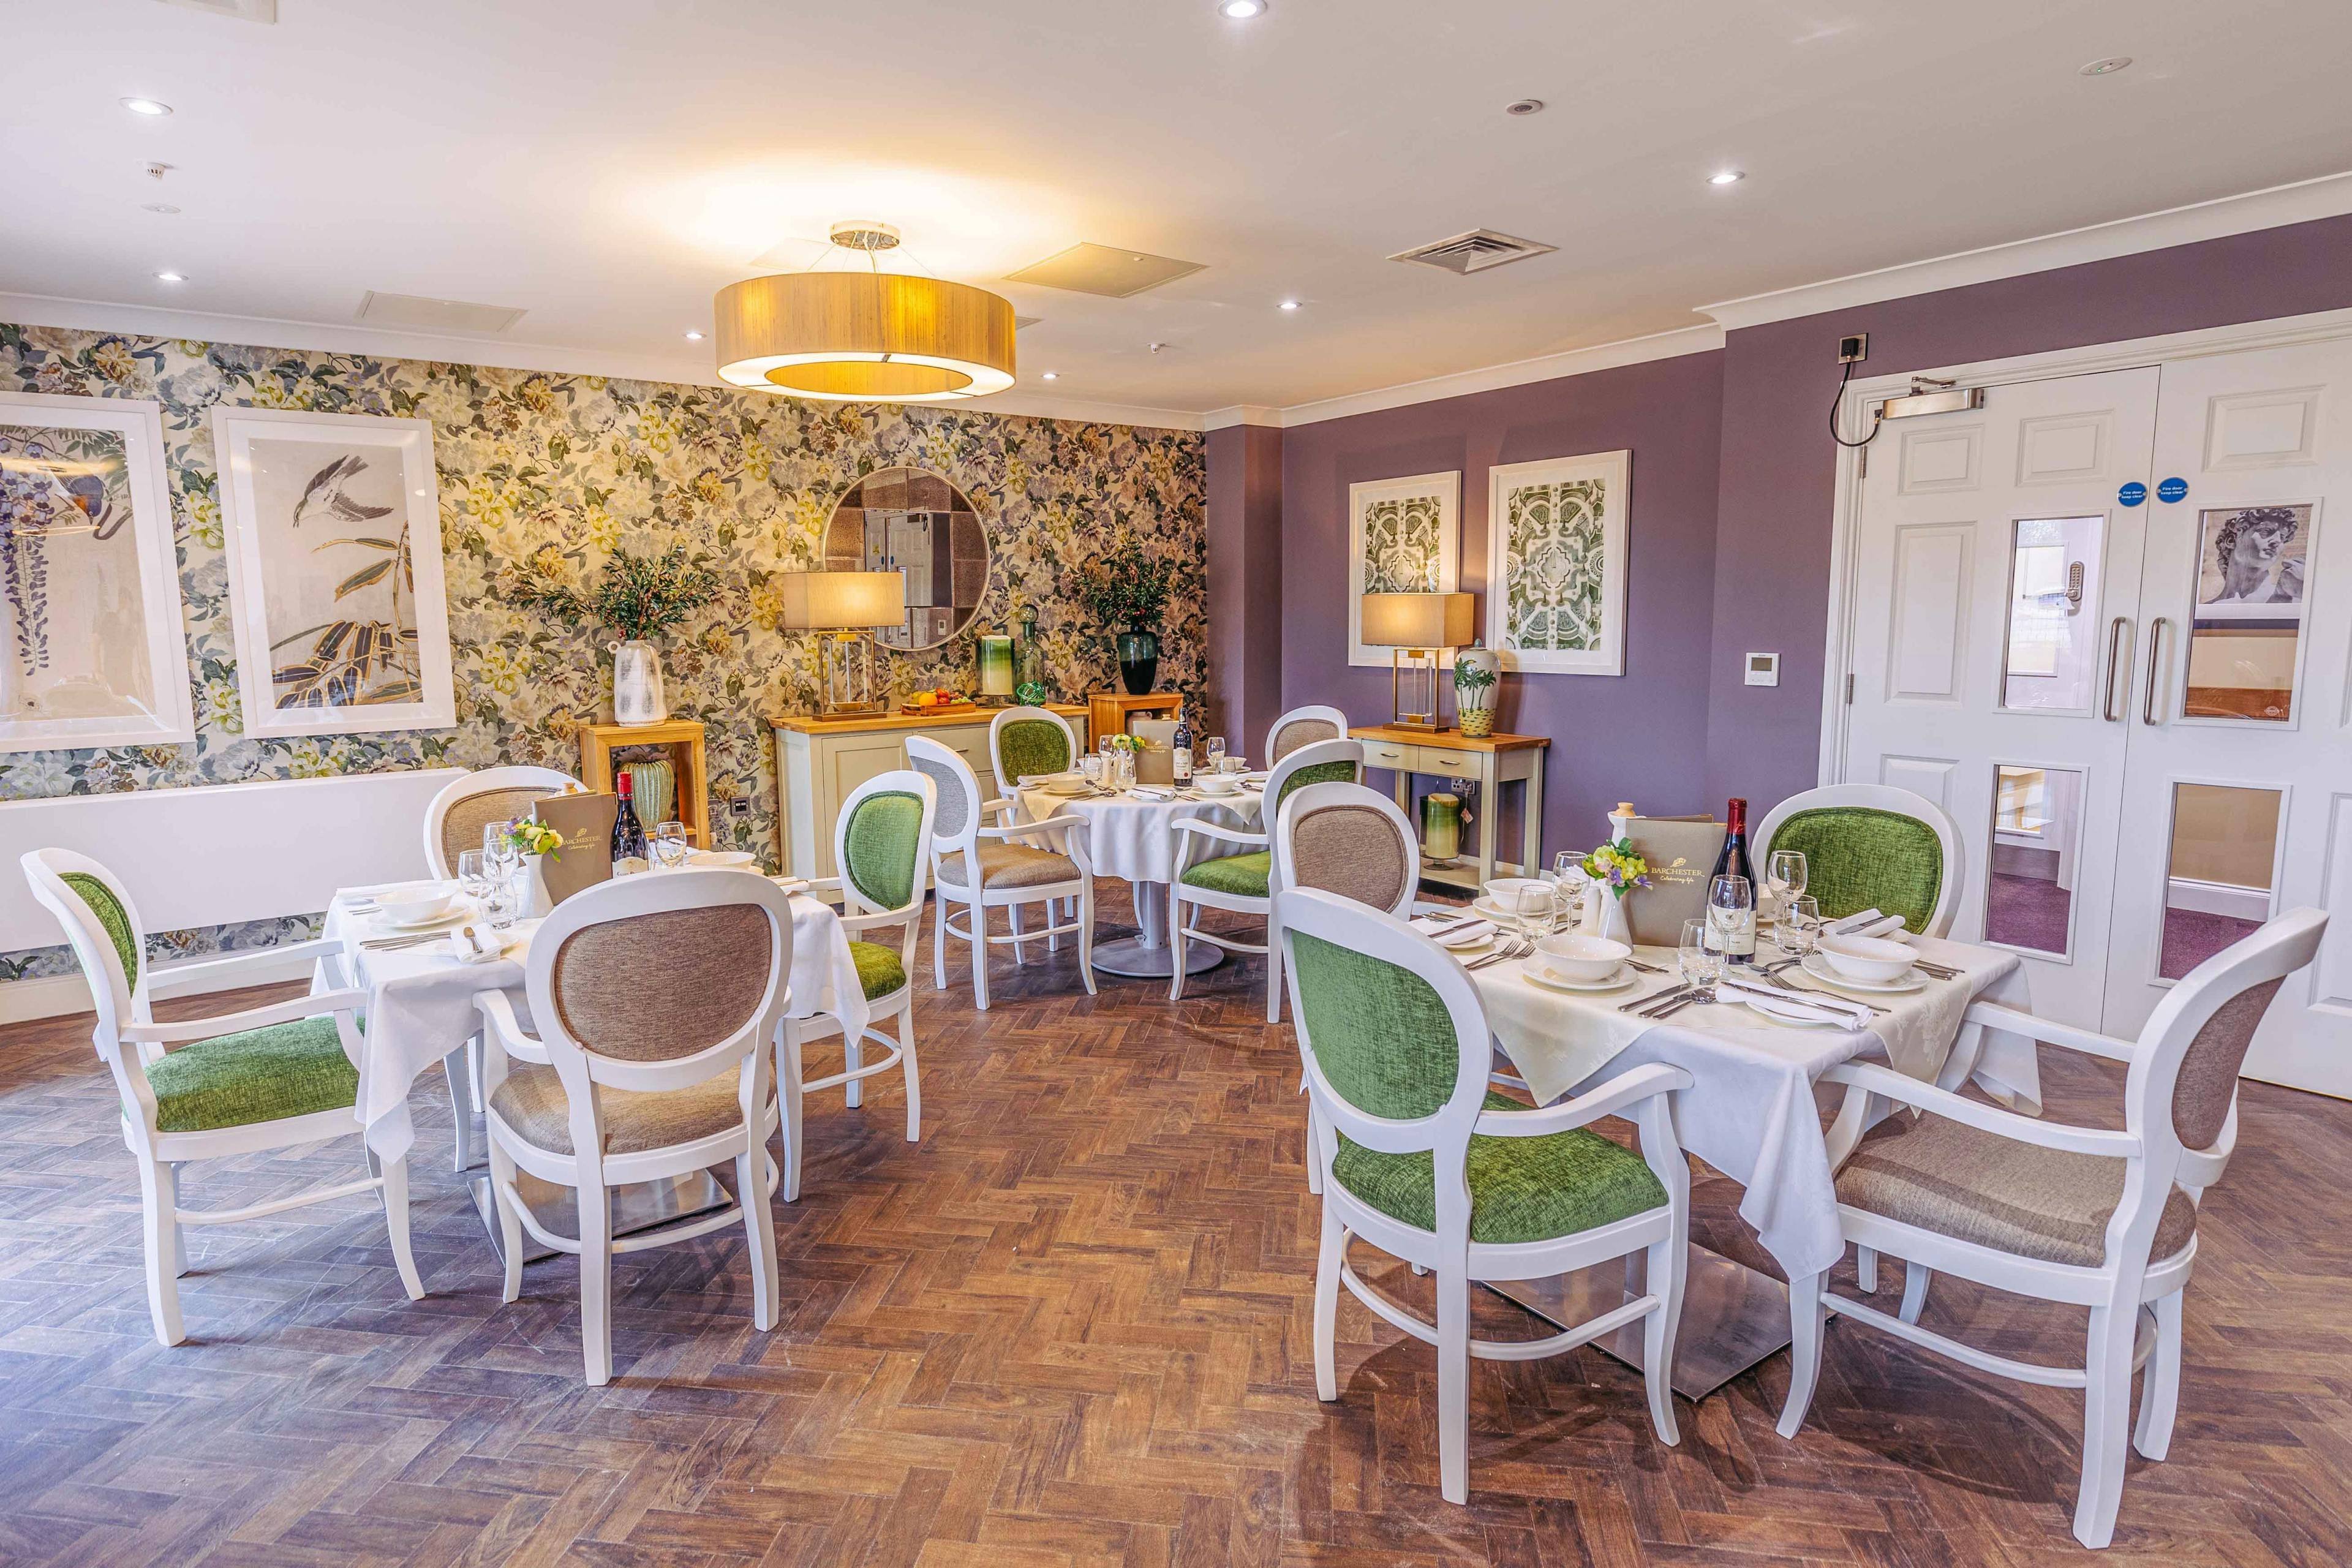 Dining Area at Bere Grove Care Home in Horndean, East Hampshire